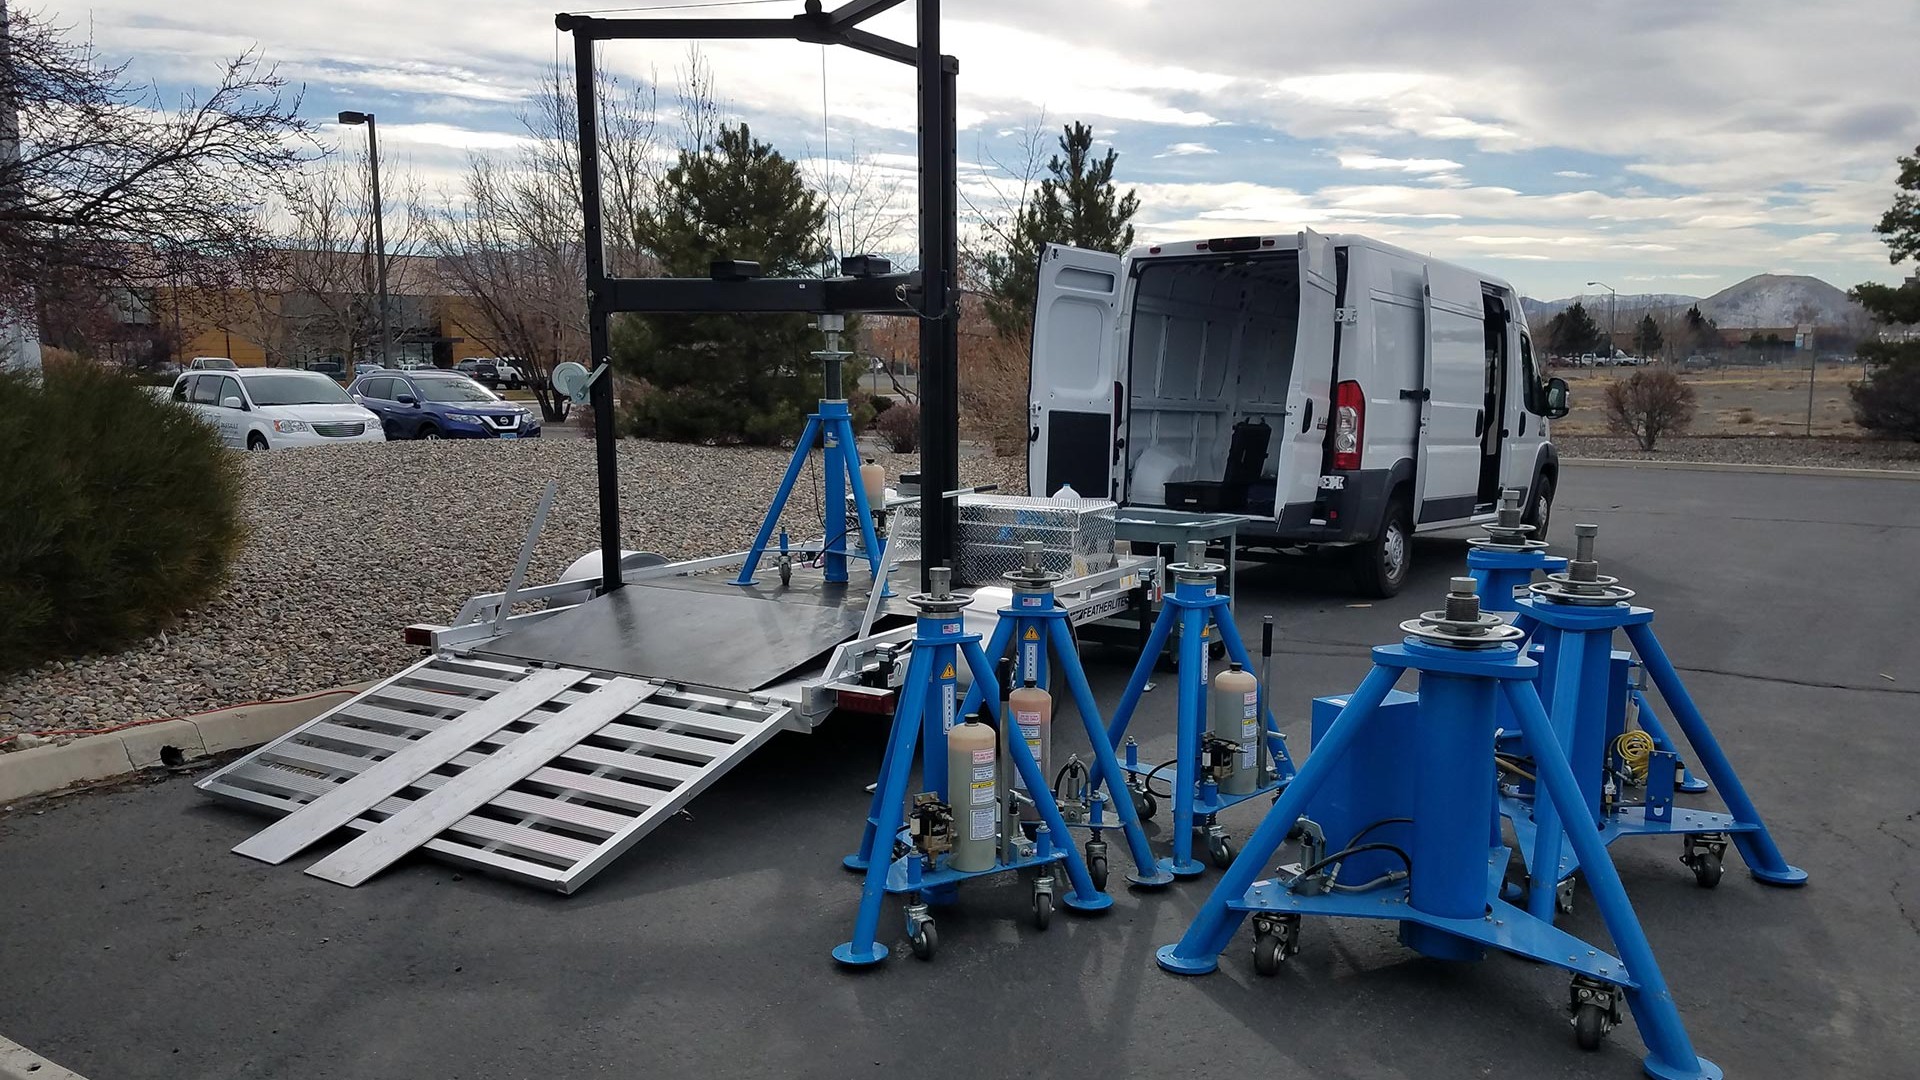 Mobile aircraft jack load calibration equipment being pulled on a trailer for on-site calibration